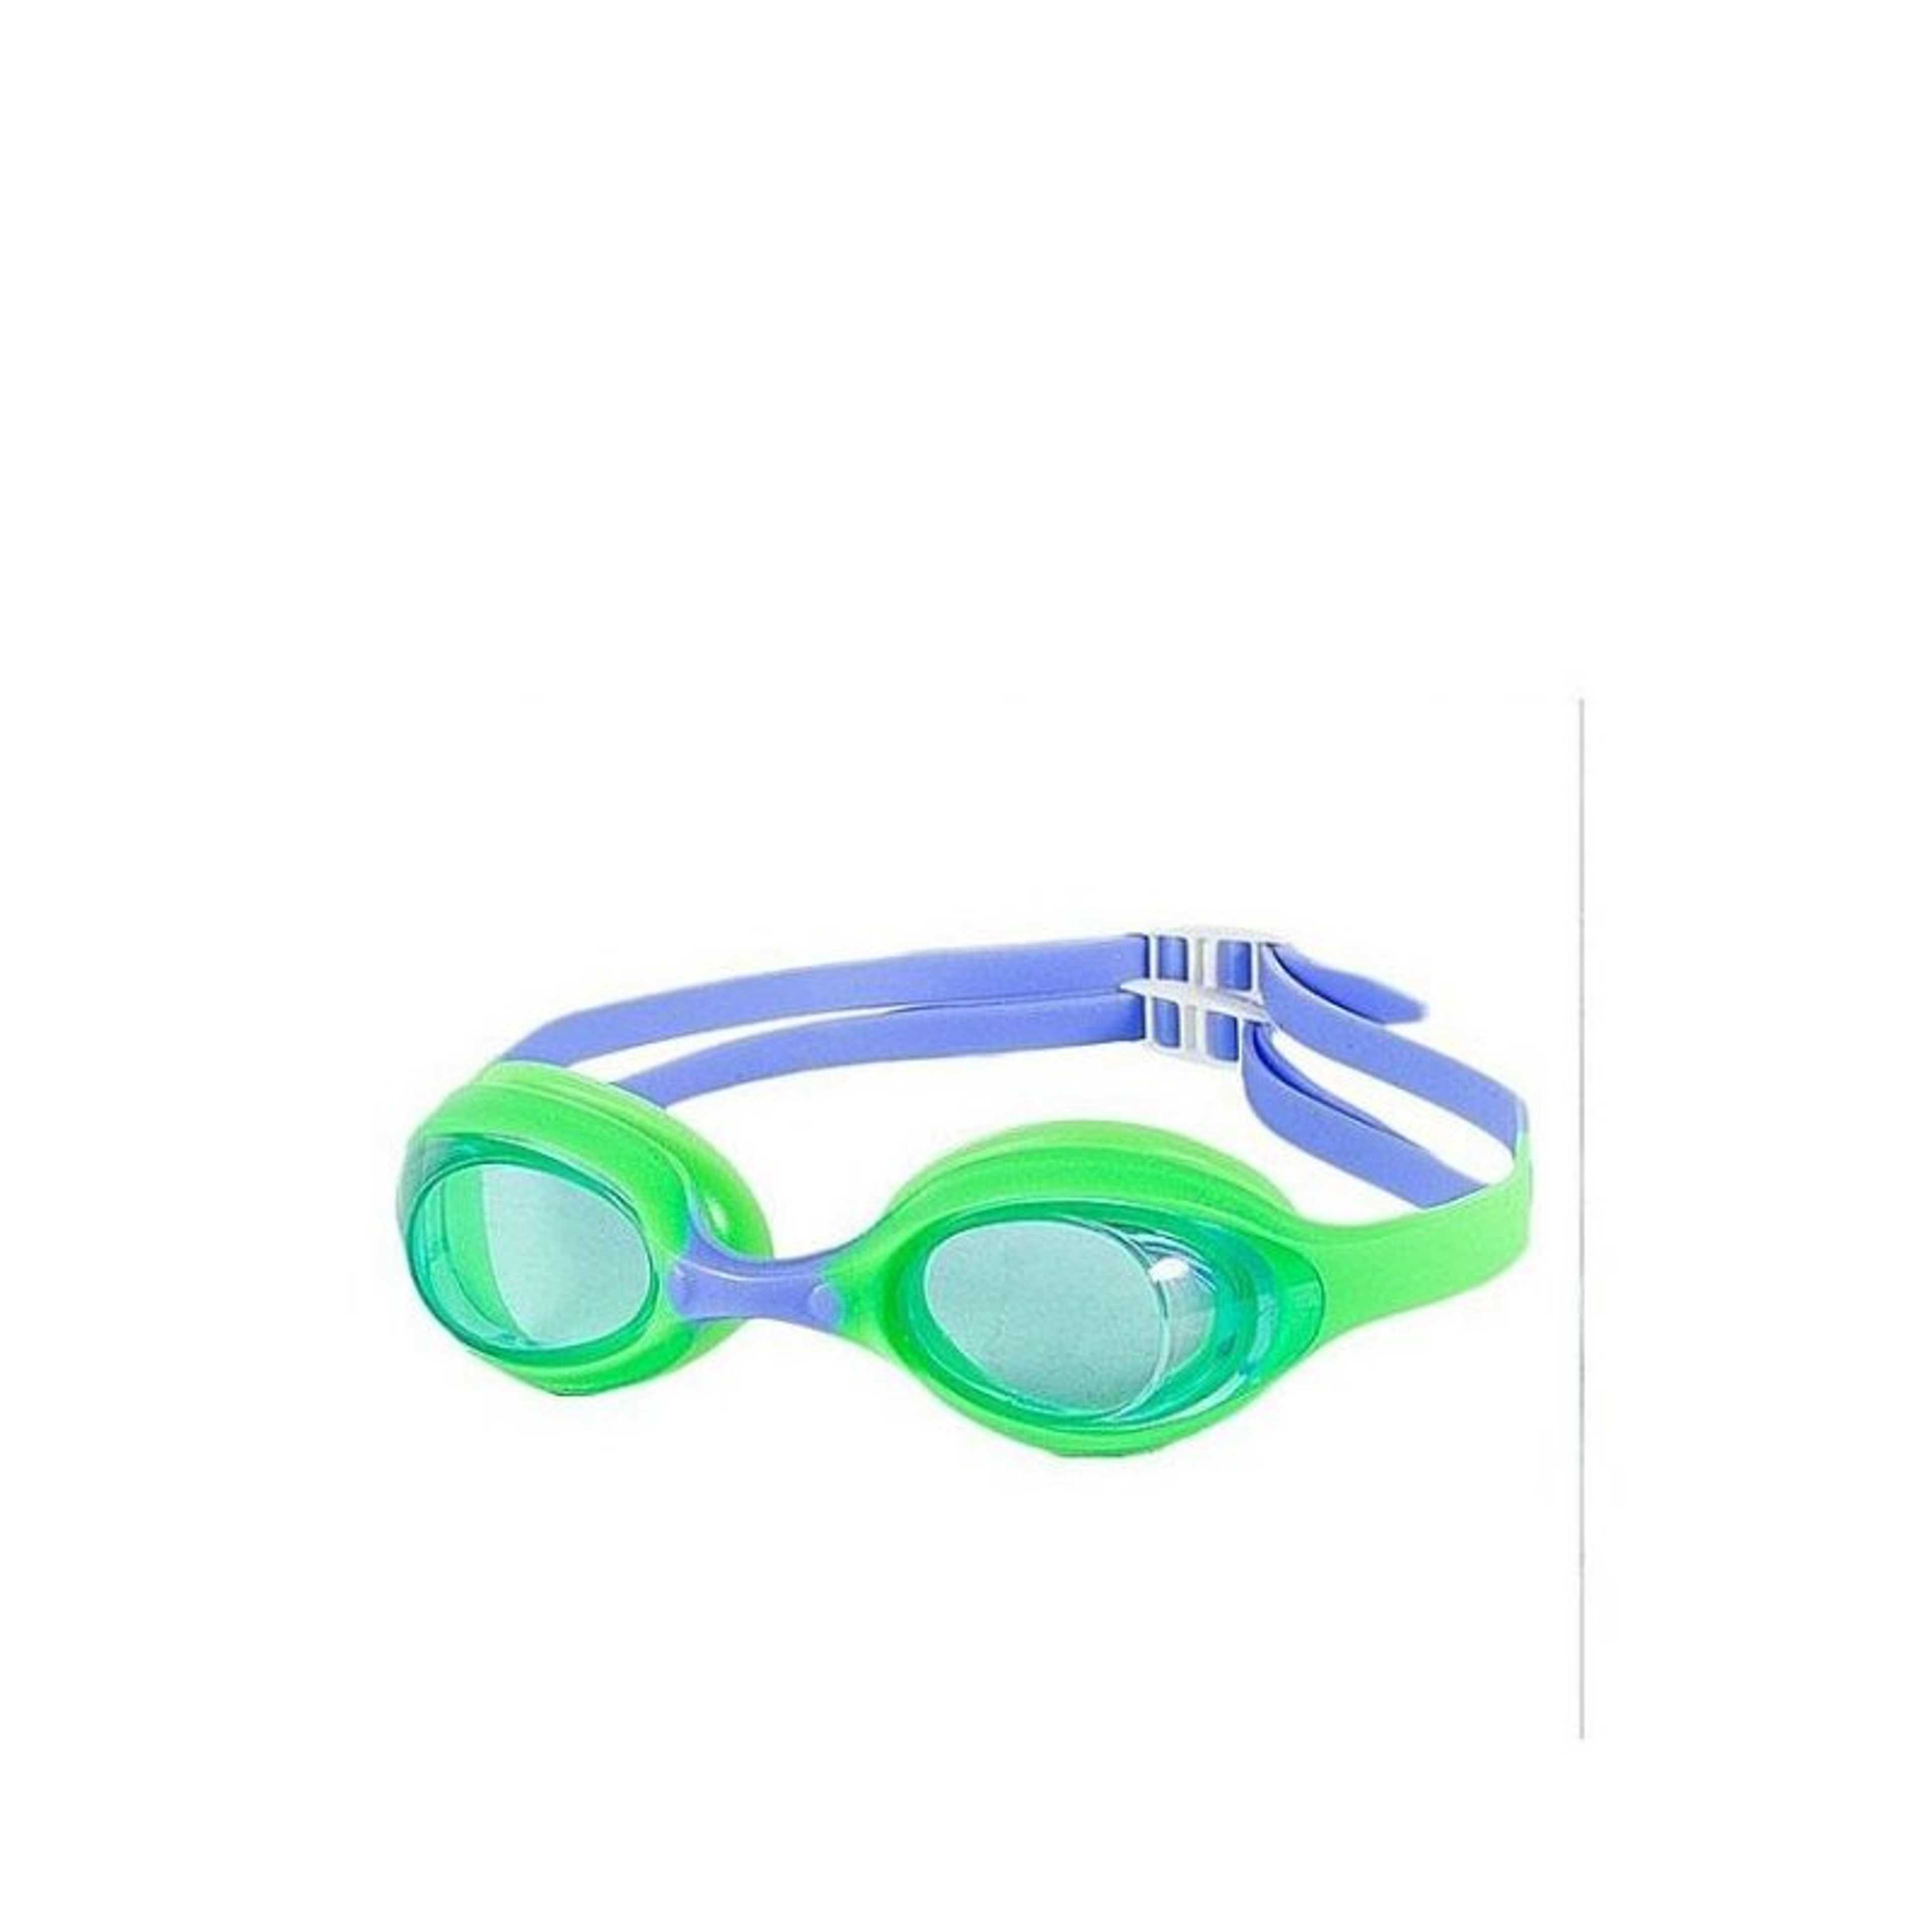 Grilong Swimming Goggle For Kids - Green & Blue